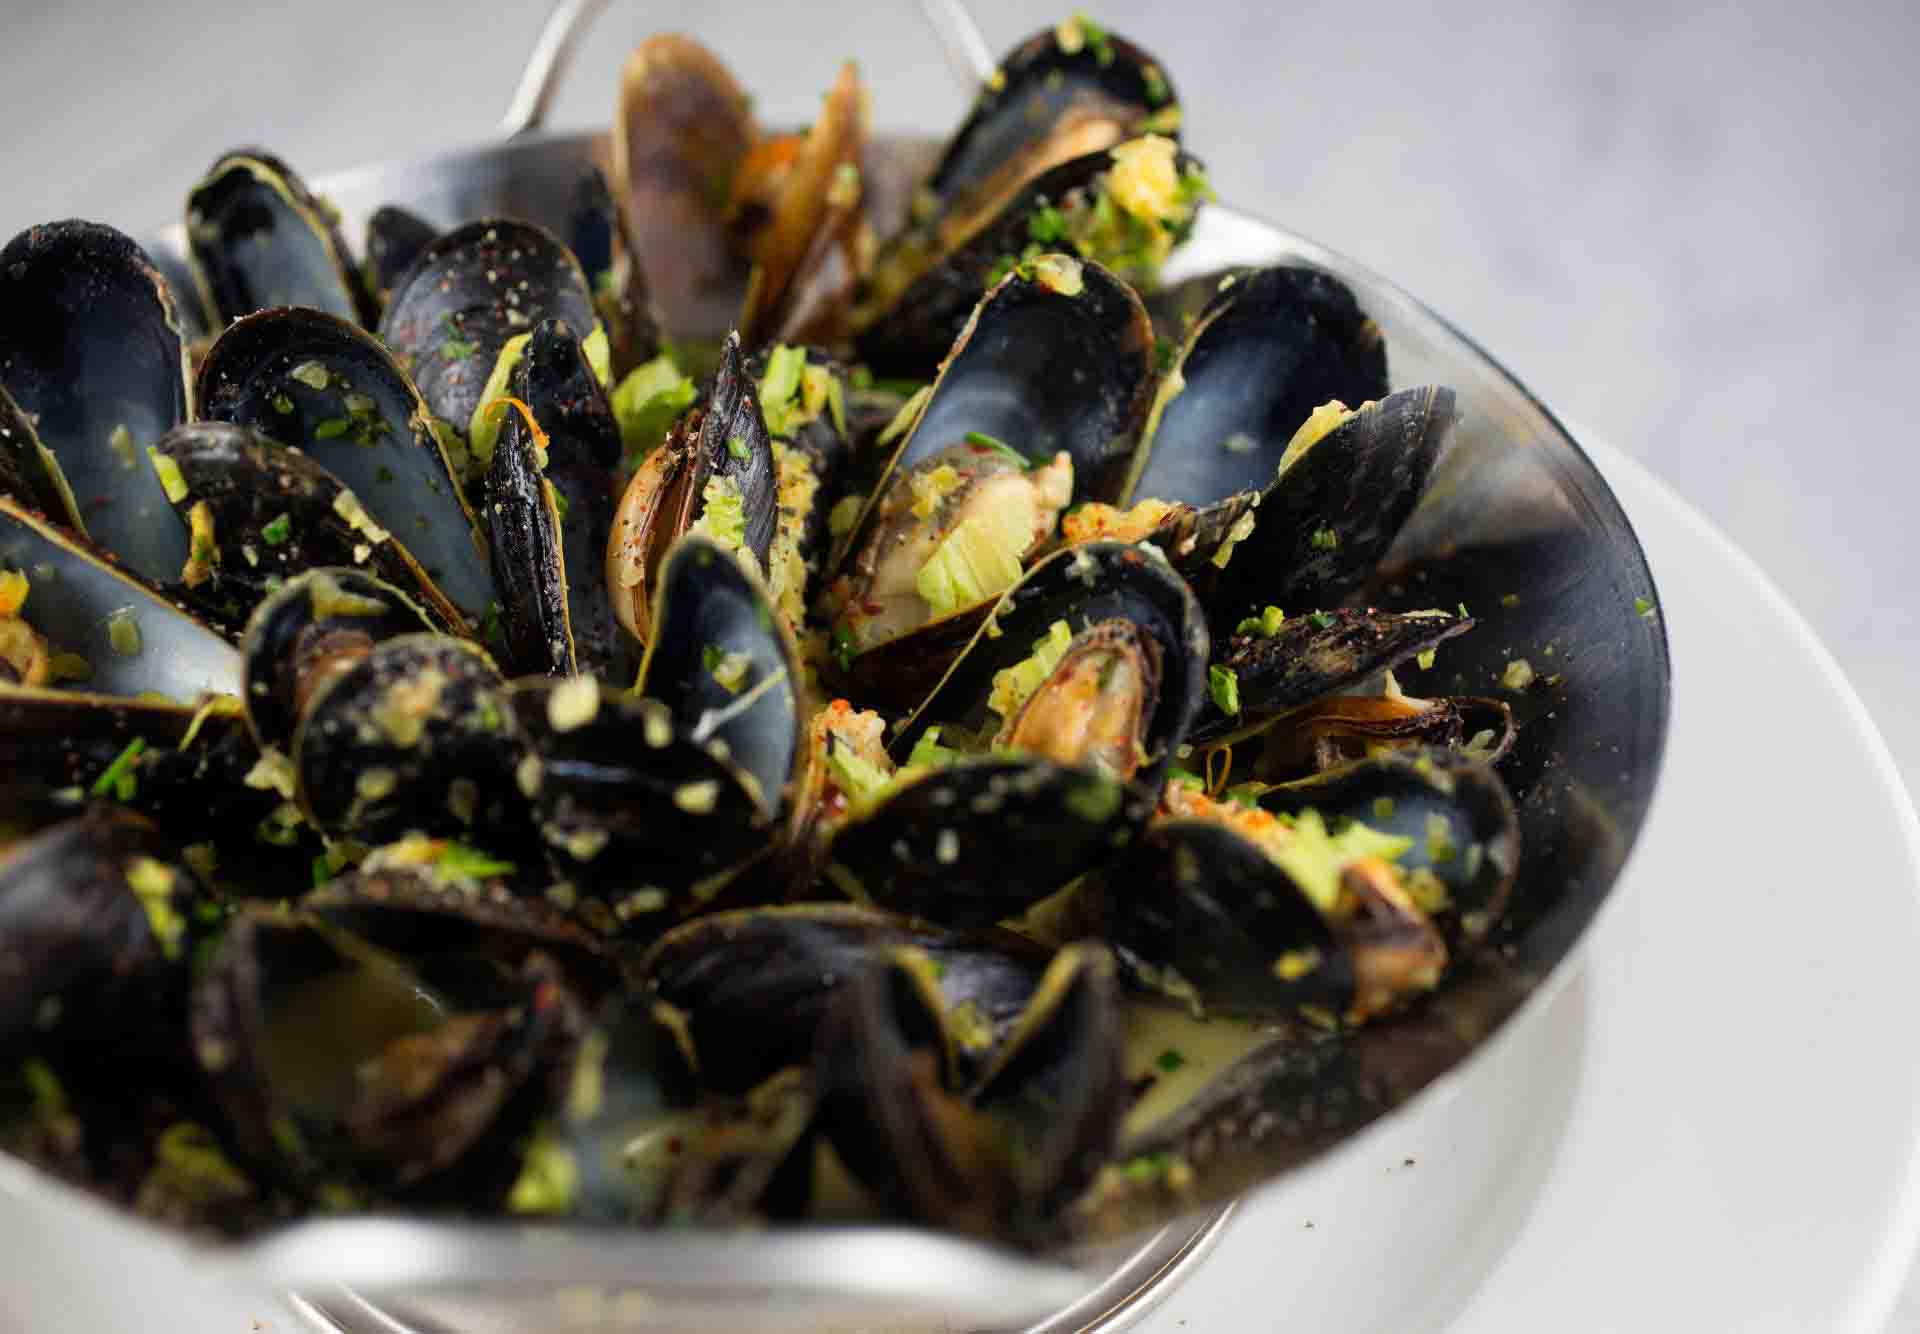 Prince Edward Island's Steamed Mussels